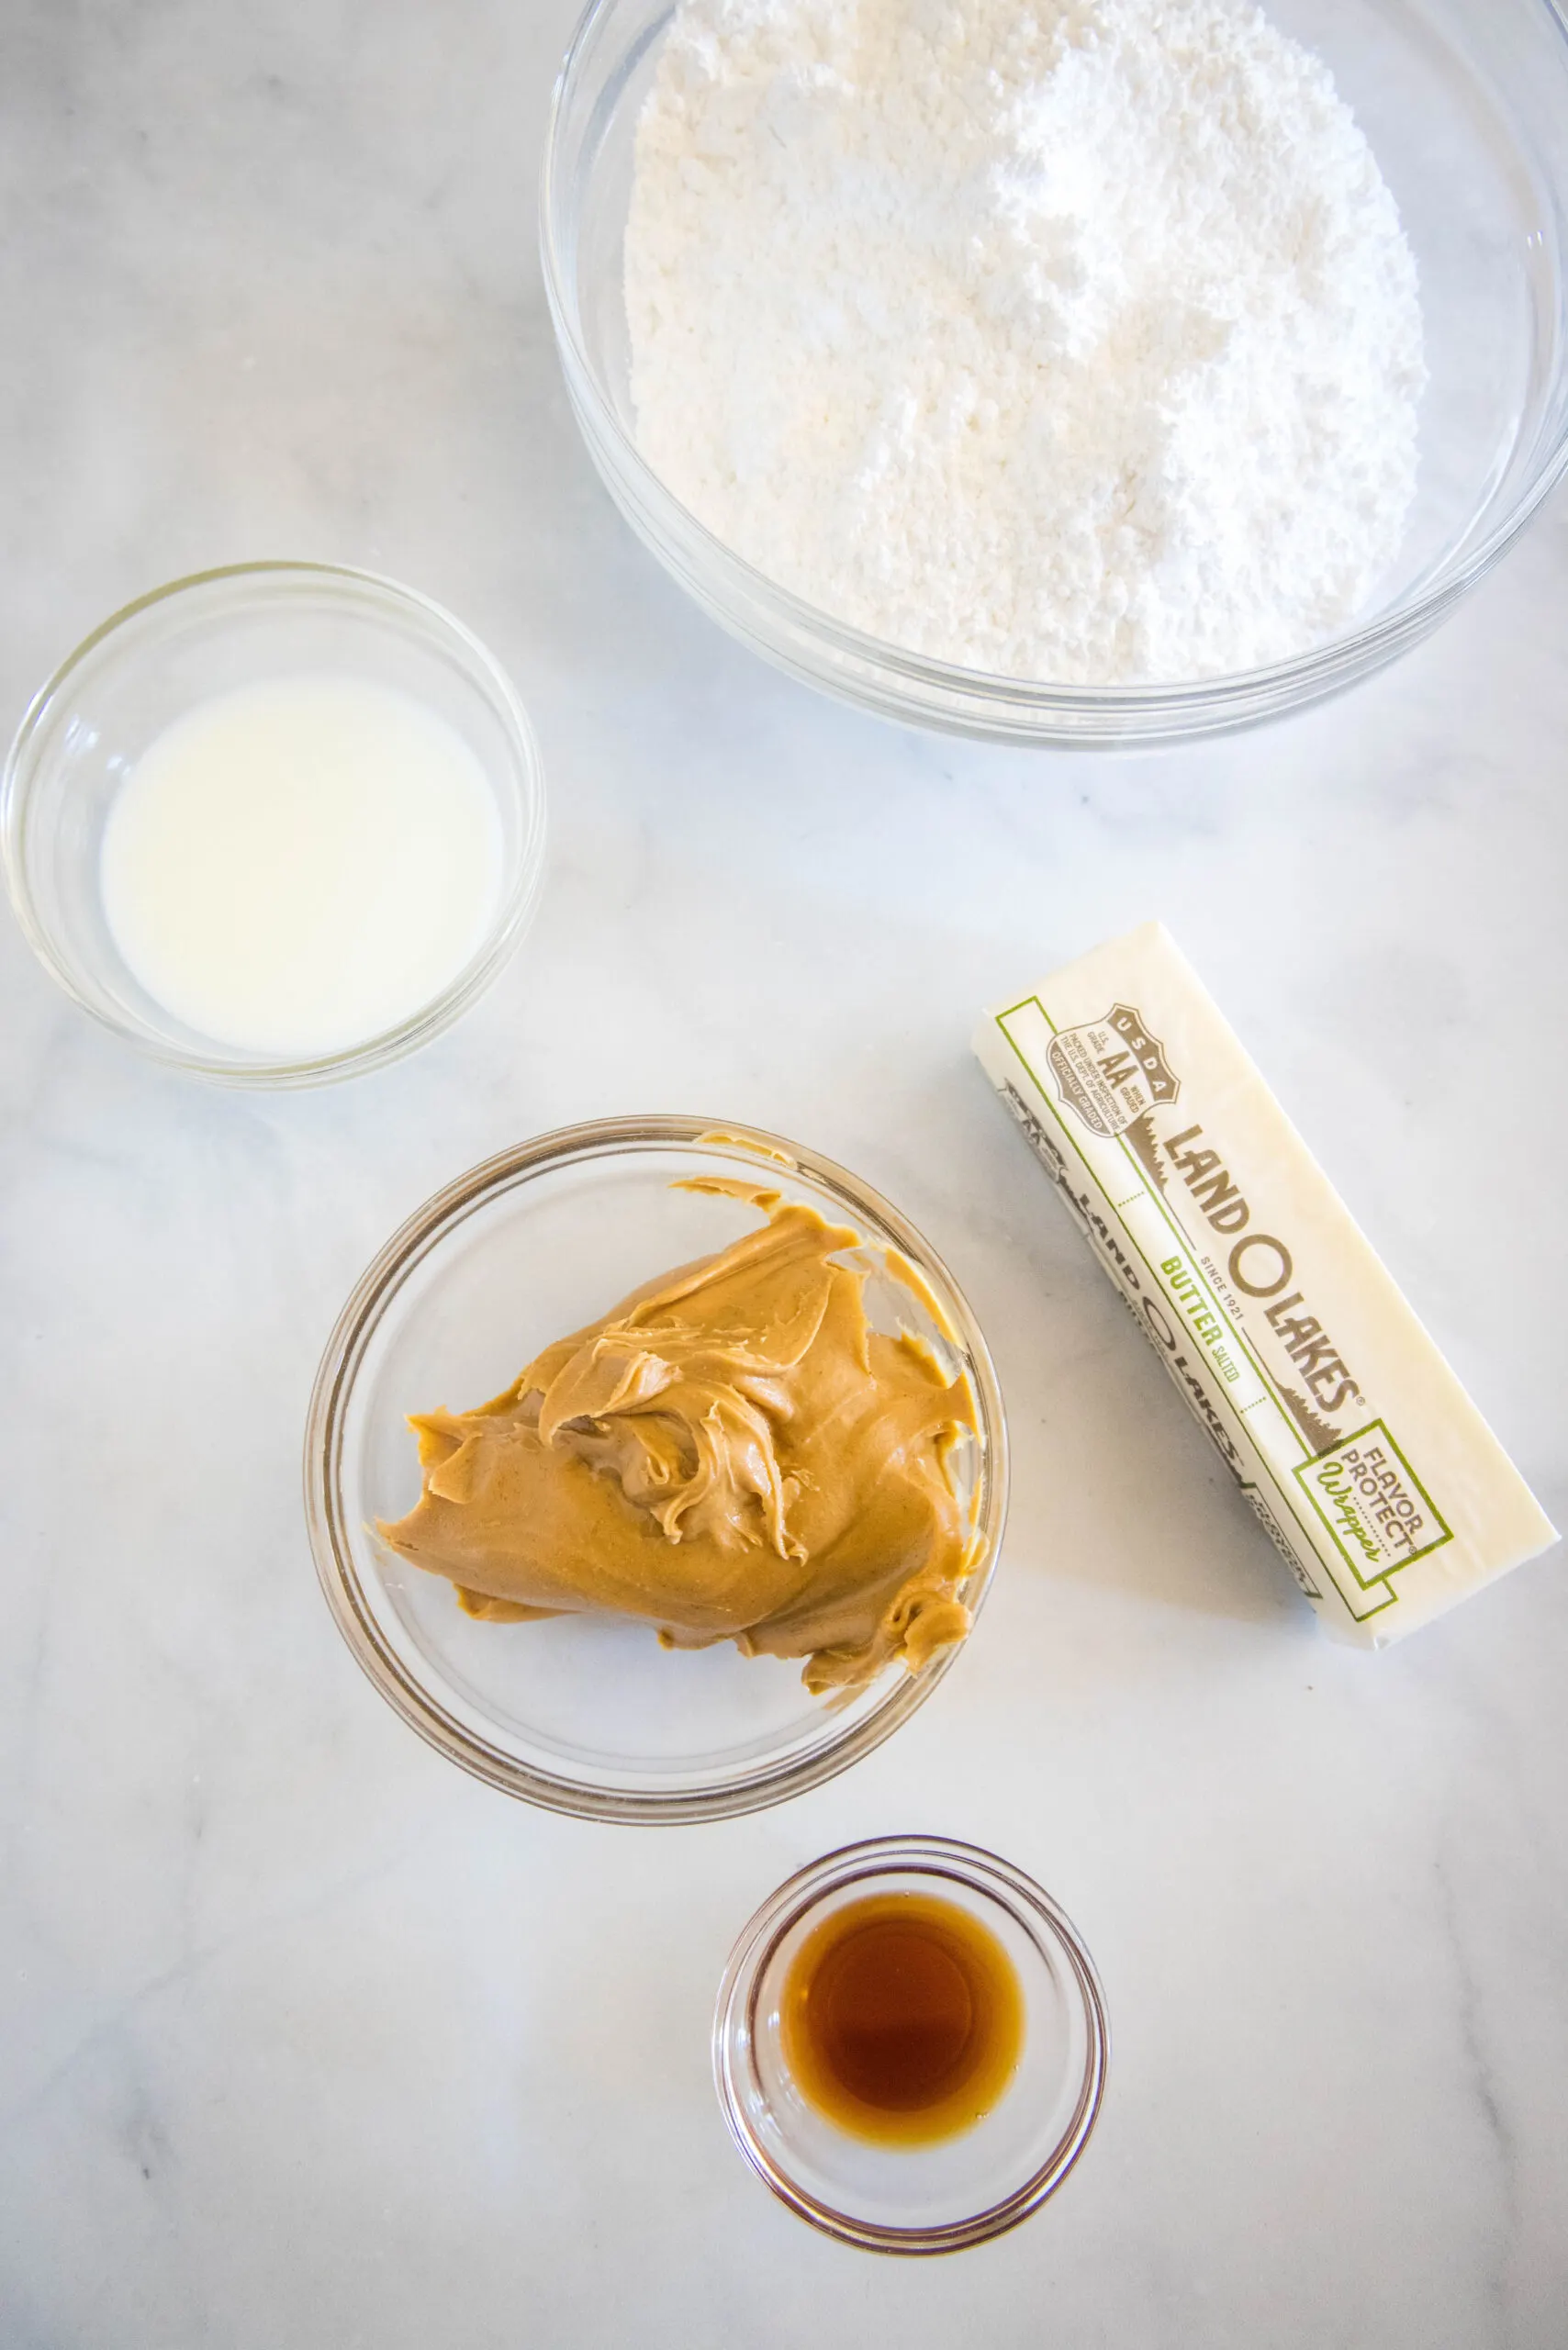 Ingredients for peanut butter frosting.